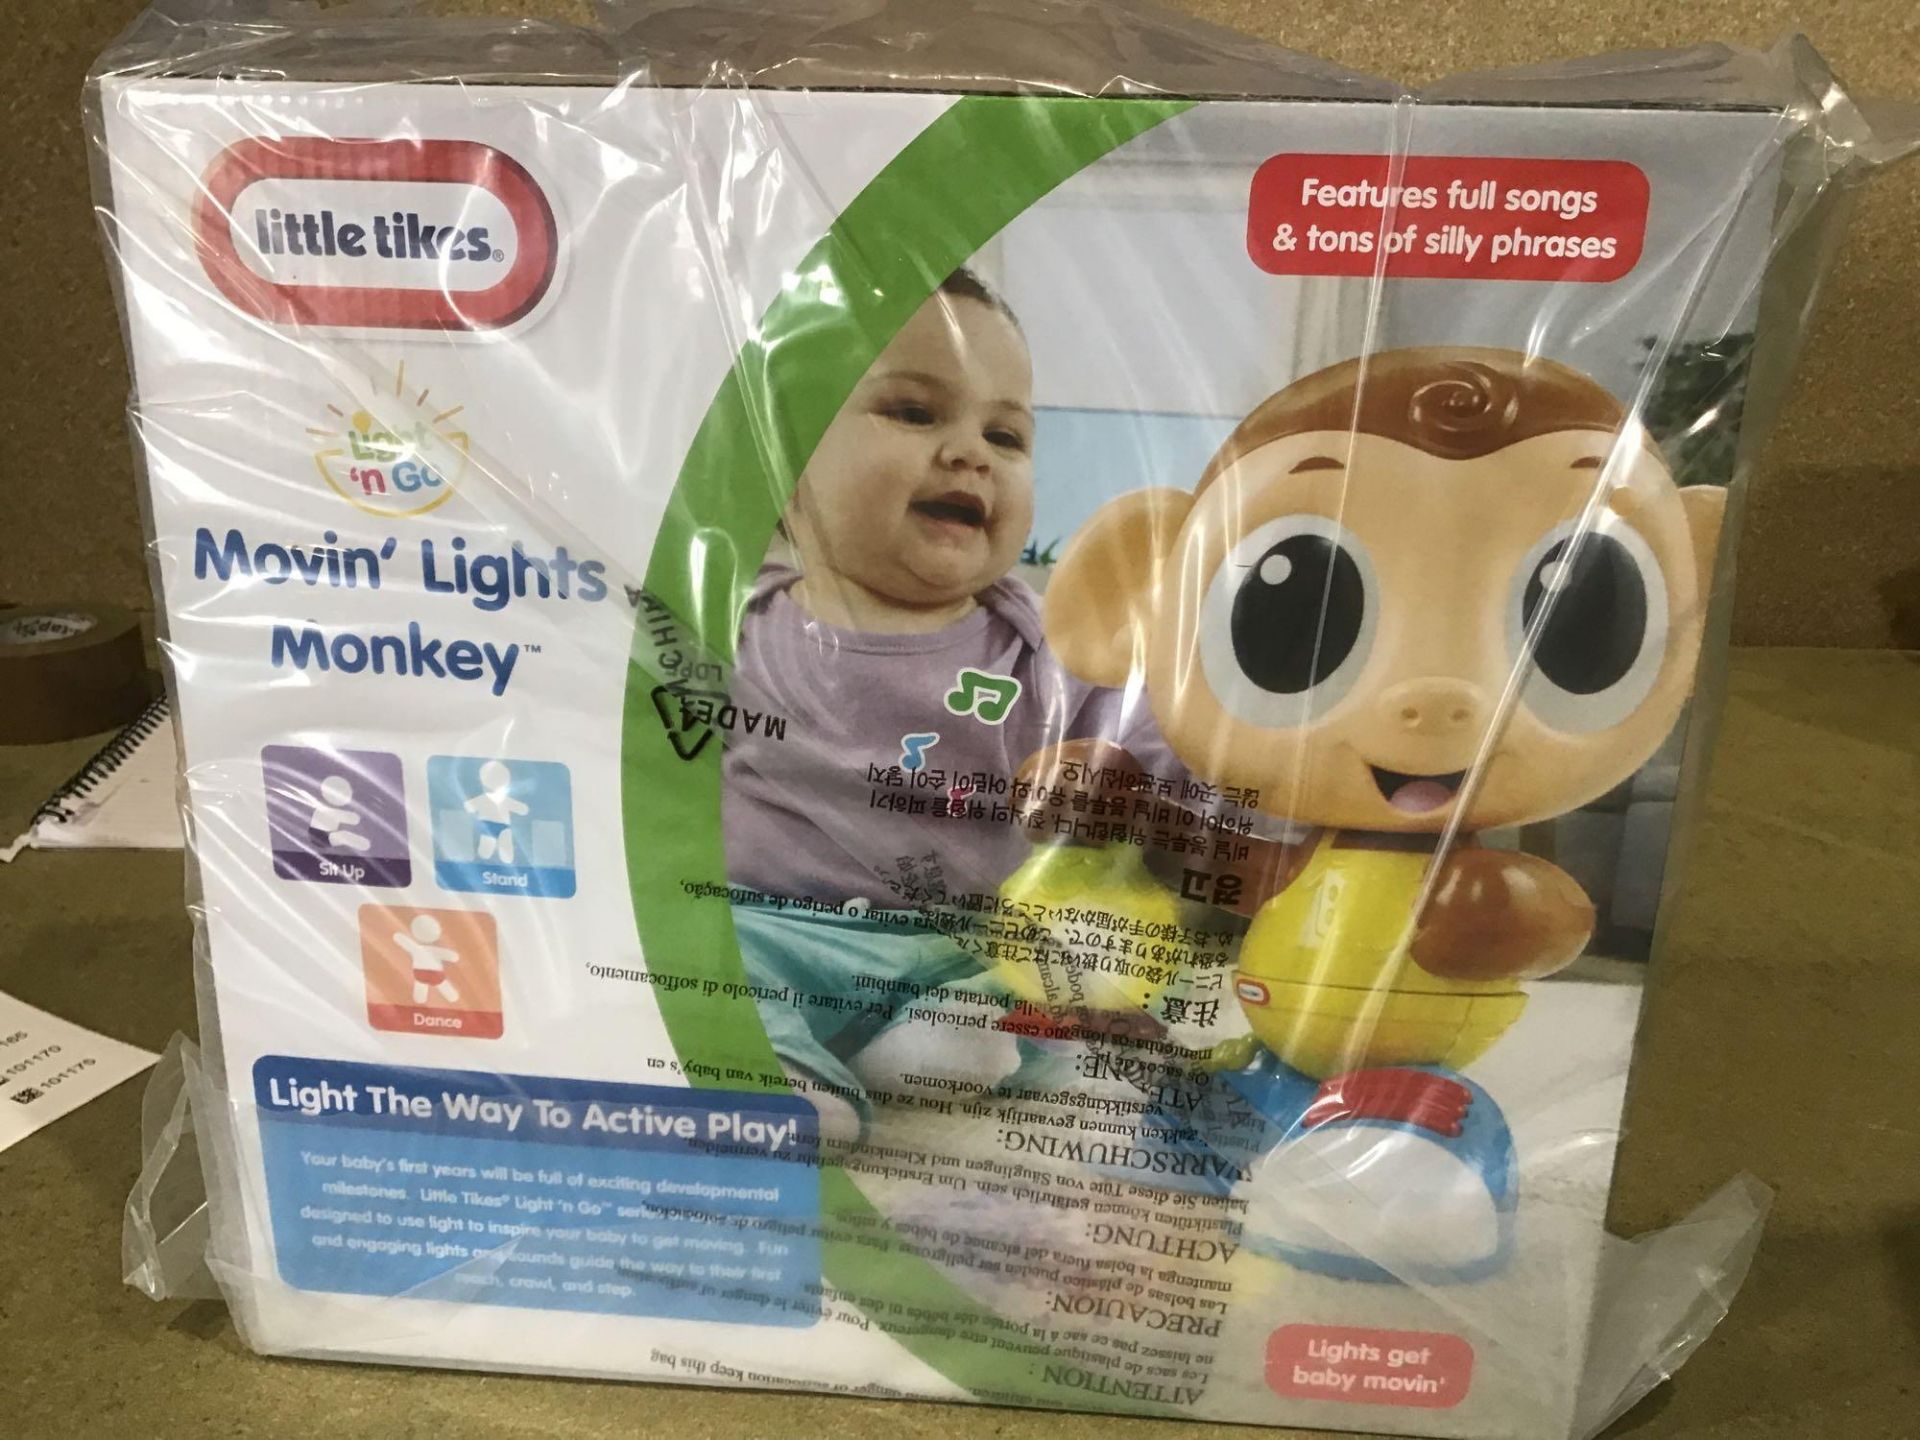 Little Tikes Moving Lights Monkey - £12.00 RRP - Image 3 of 4